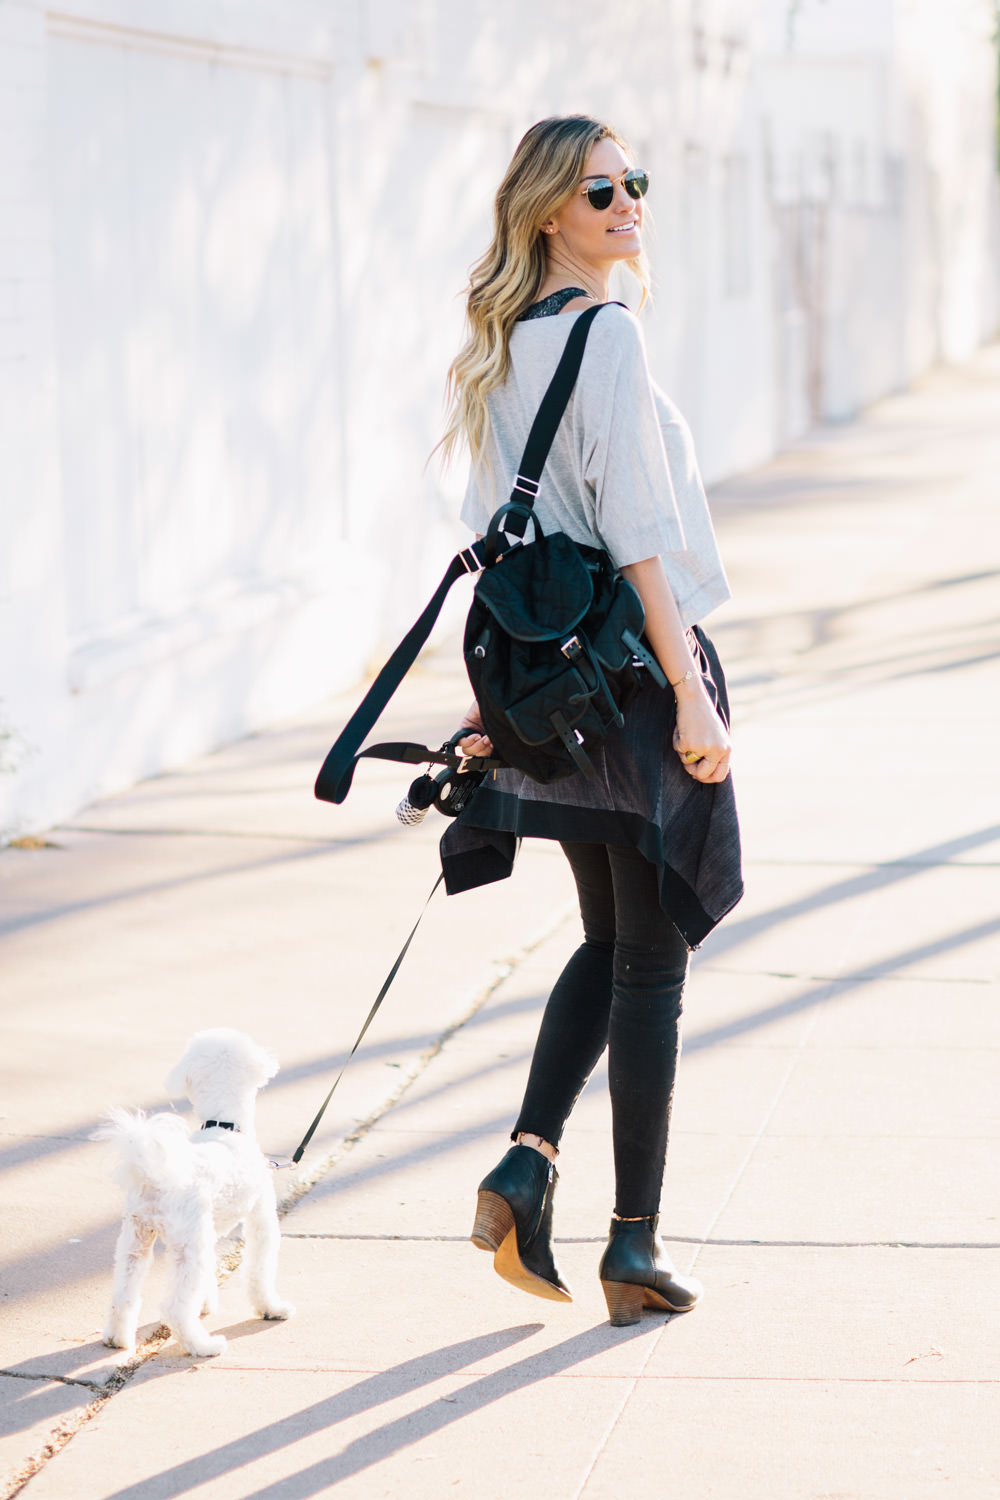 Dash of Darling styles Lucy Activewear for running errands in a casual athleisure outfit.